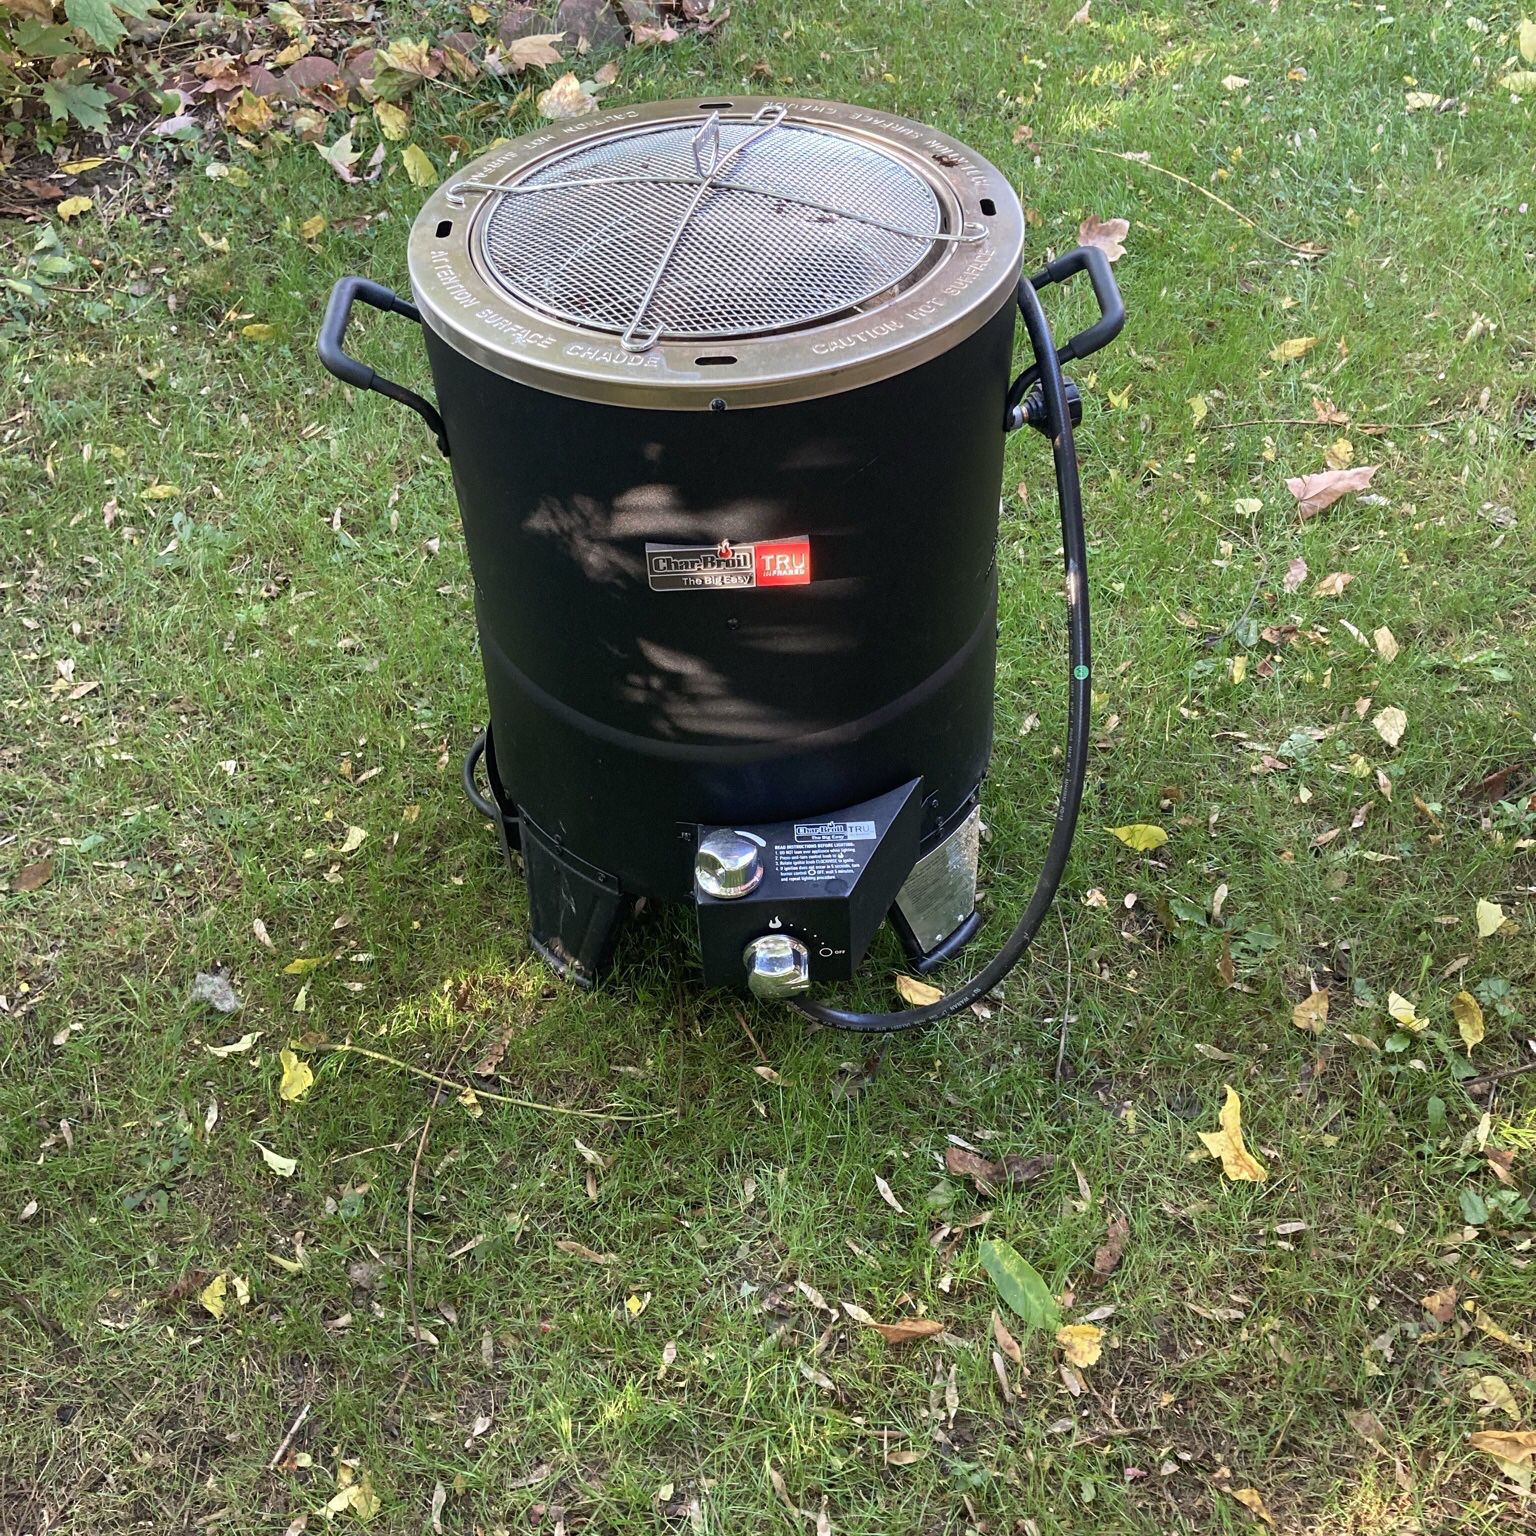 Charbroil Big Easy Turkey Cooker